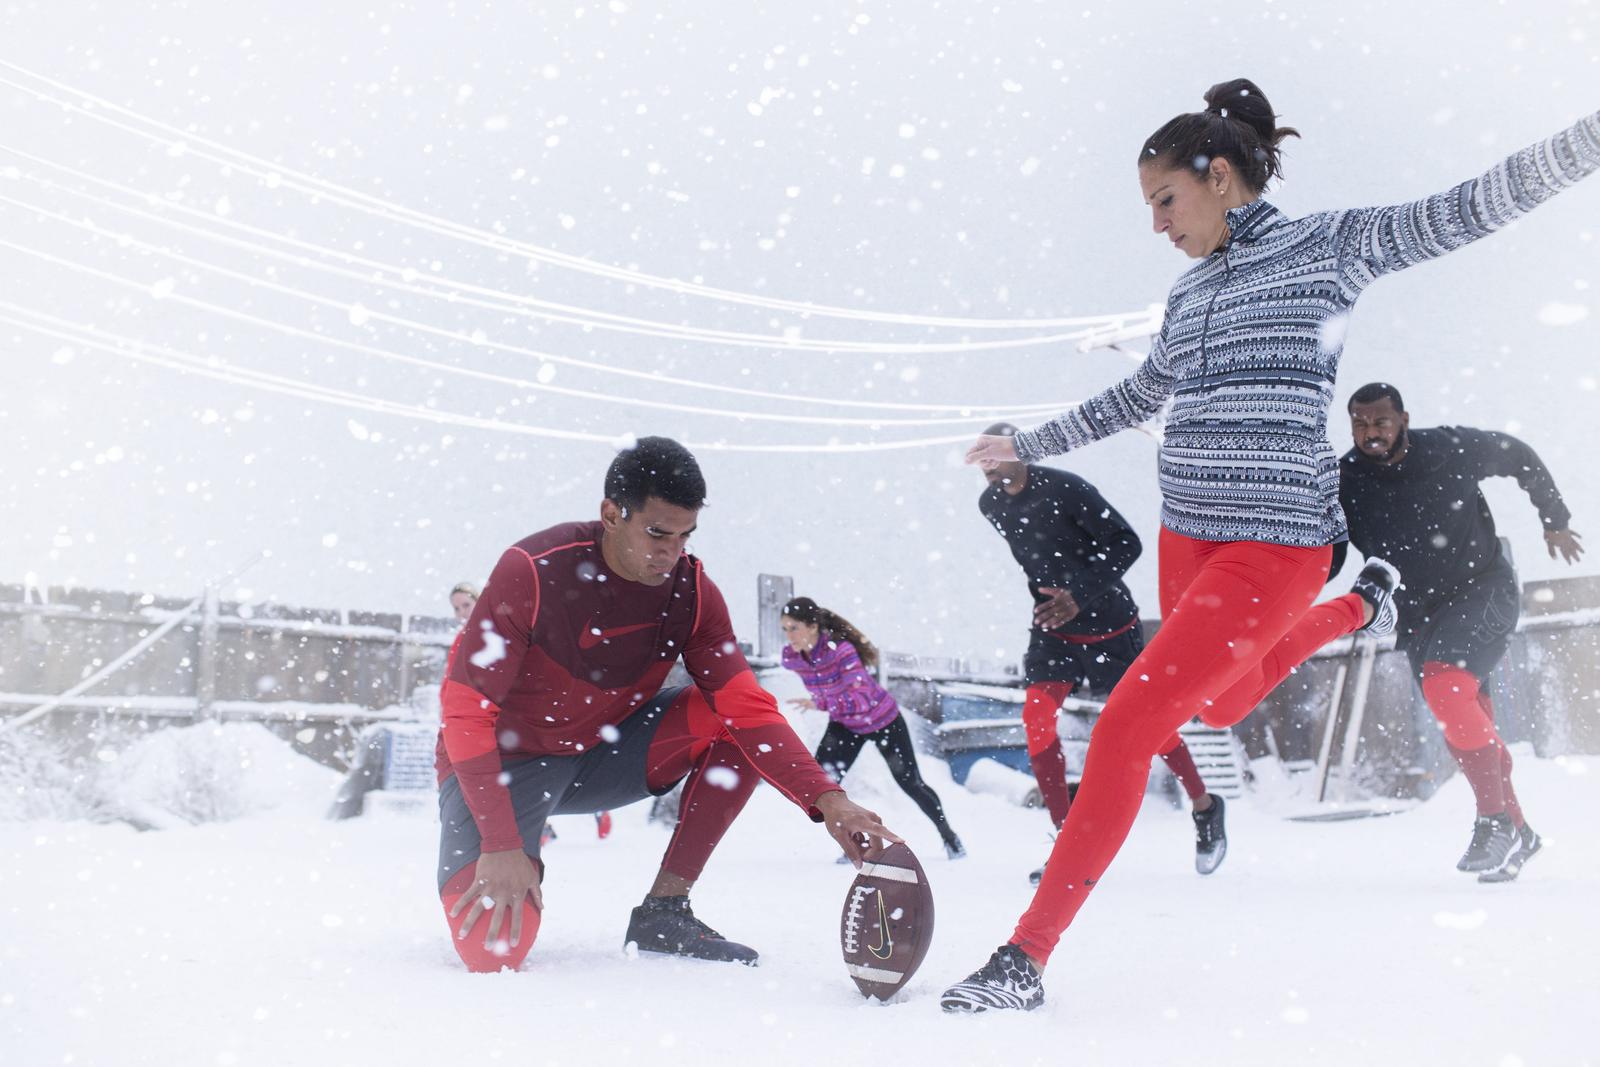 snow day Nike commercial 2015